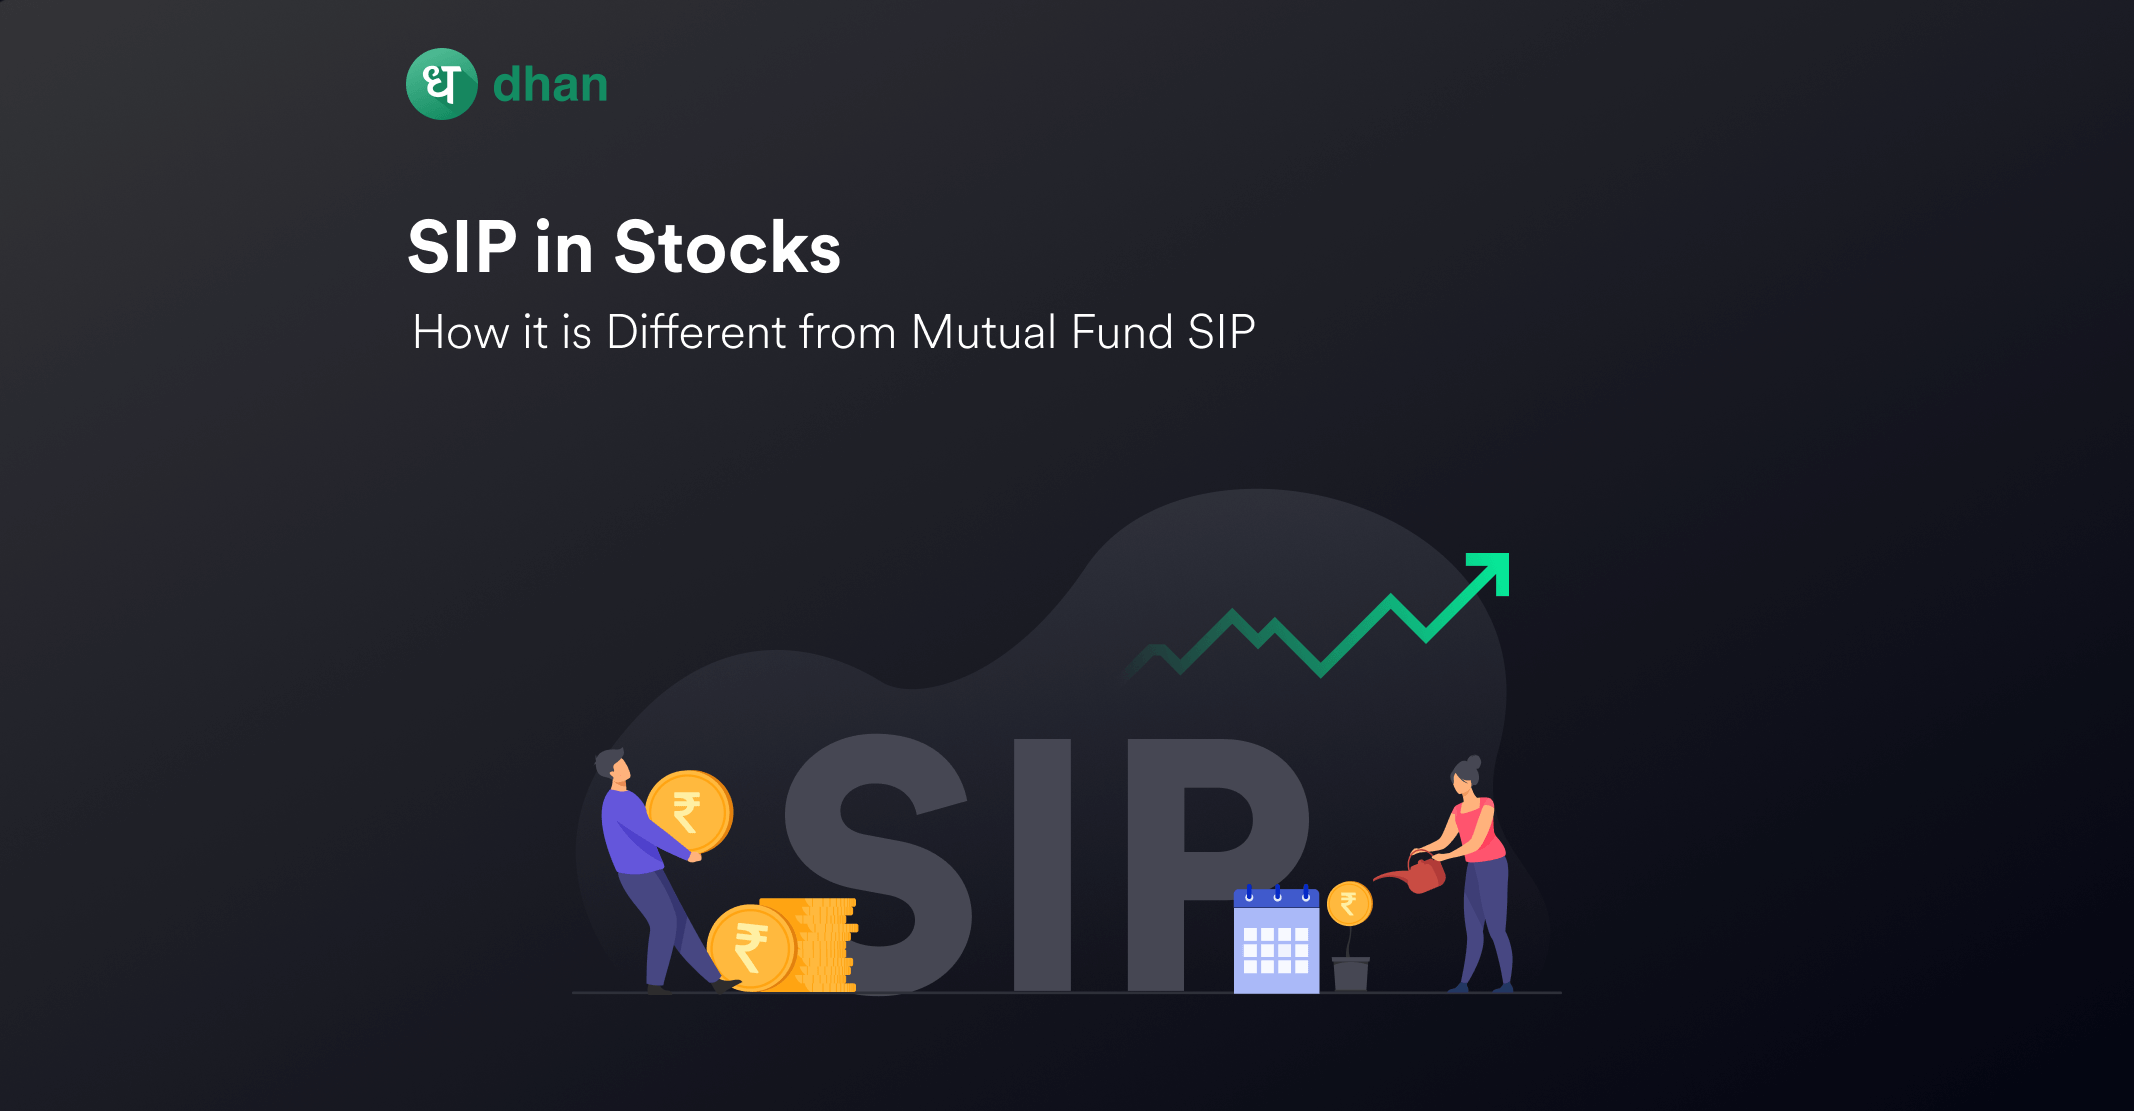 SIP in Stocks - How it is Different from SIP in Mutual Funds